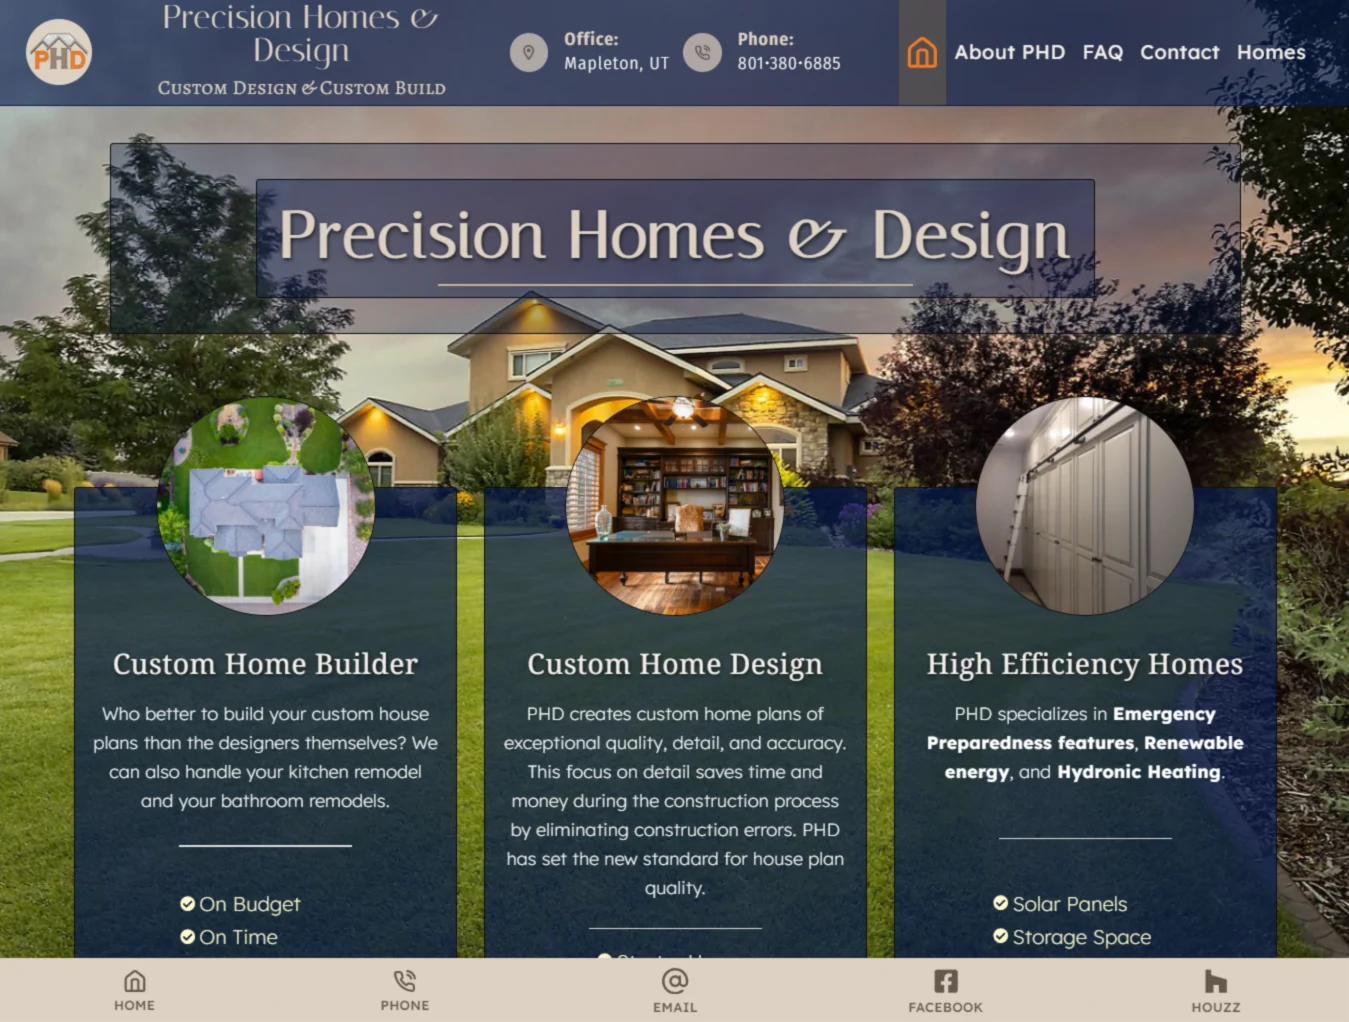 Home page image of Precision Homes & Design